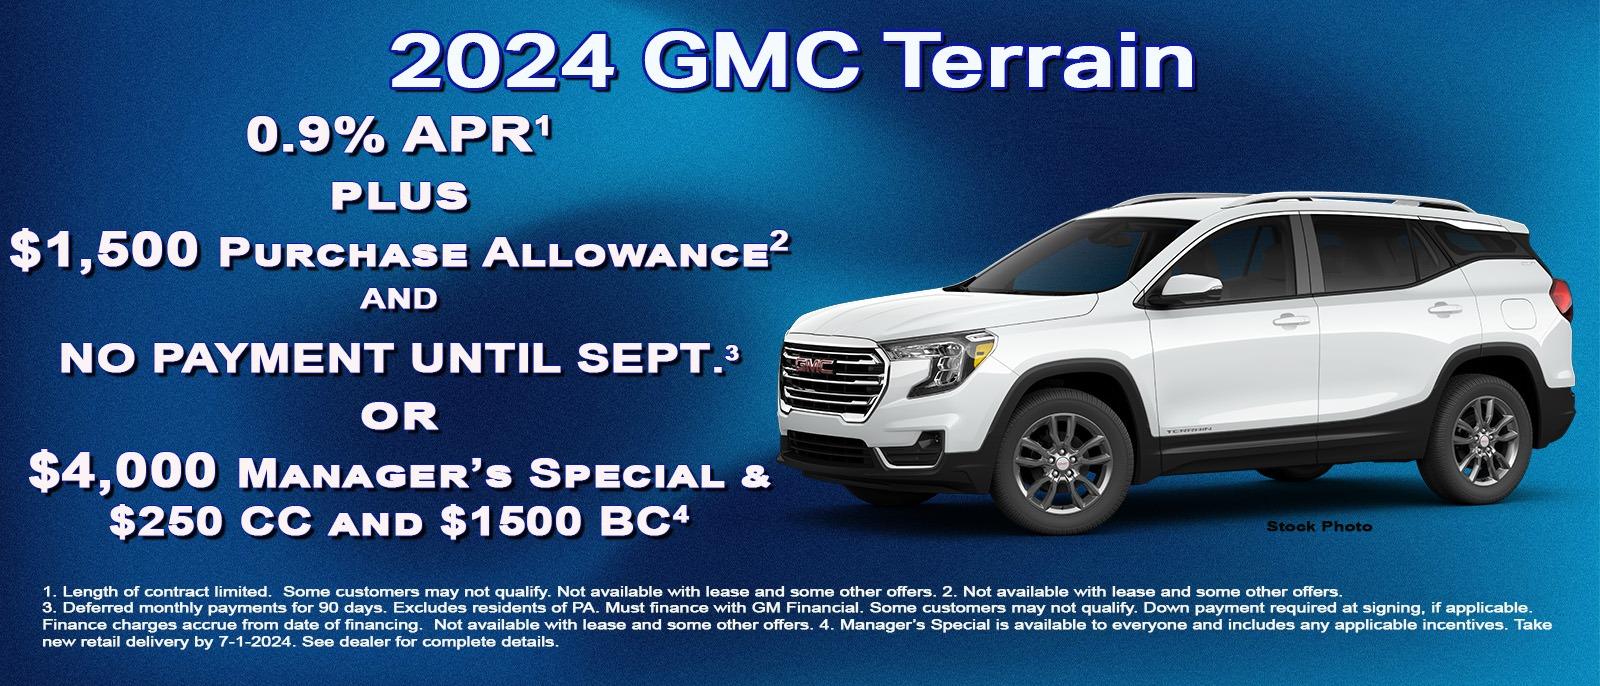 No payments on your new 2024 GMC Terrain